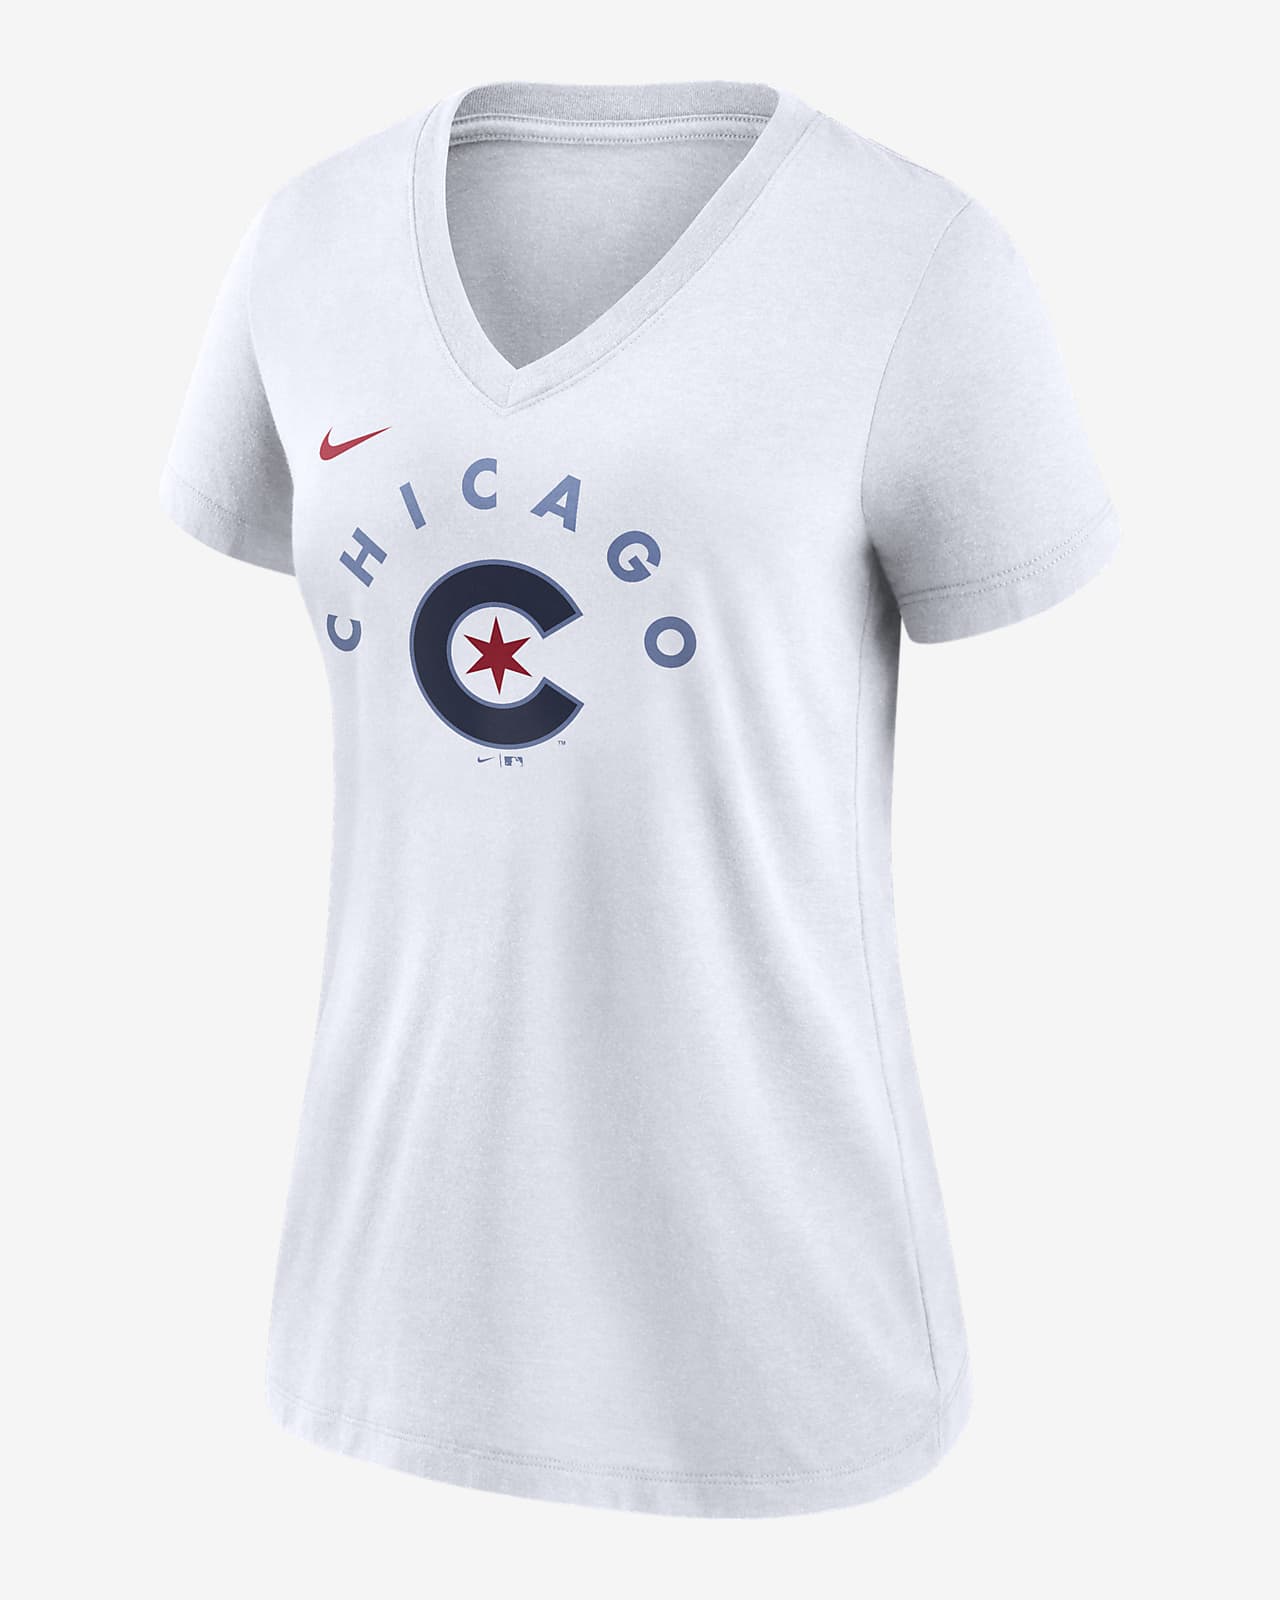 chicago cubs women's t shirts